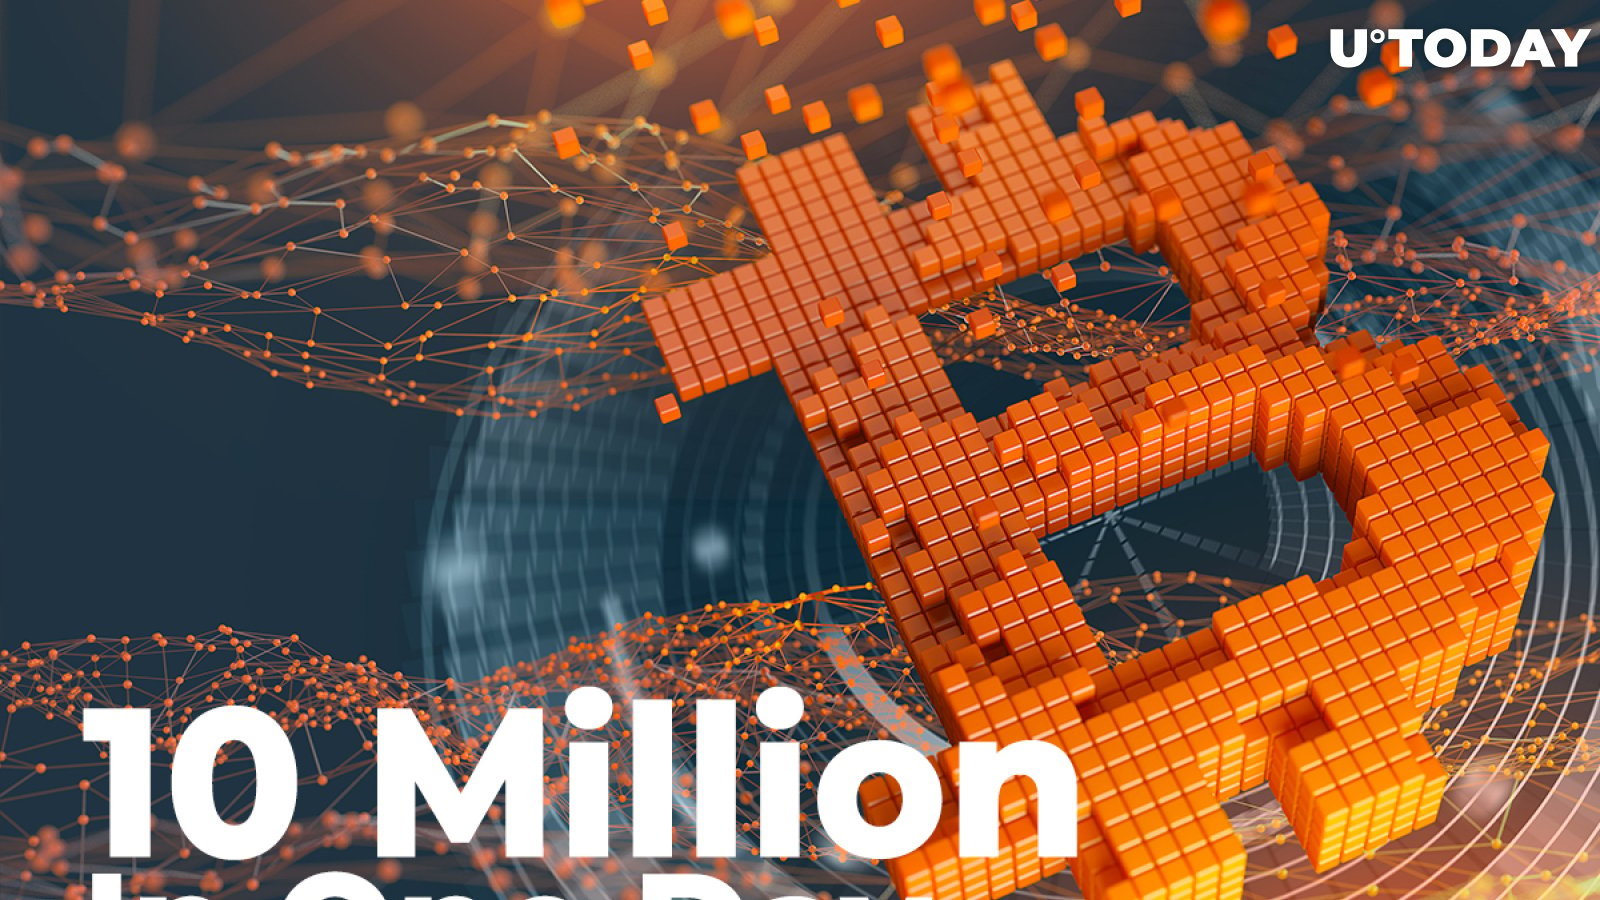 Large Transactions on Bitcoin Reached 10 Million in One Day, But It Might Be Harmful to Market